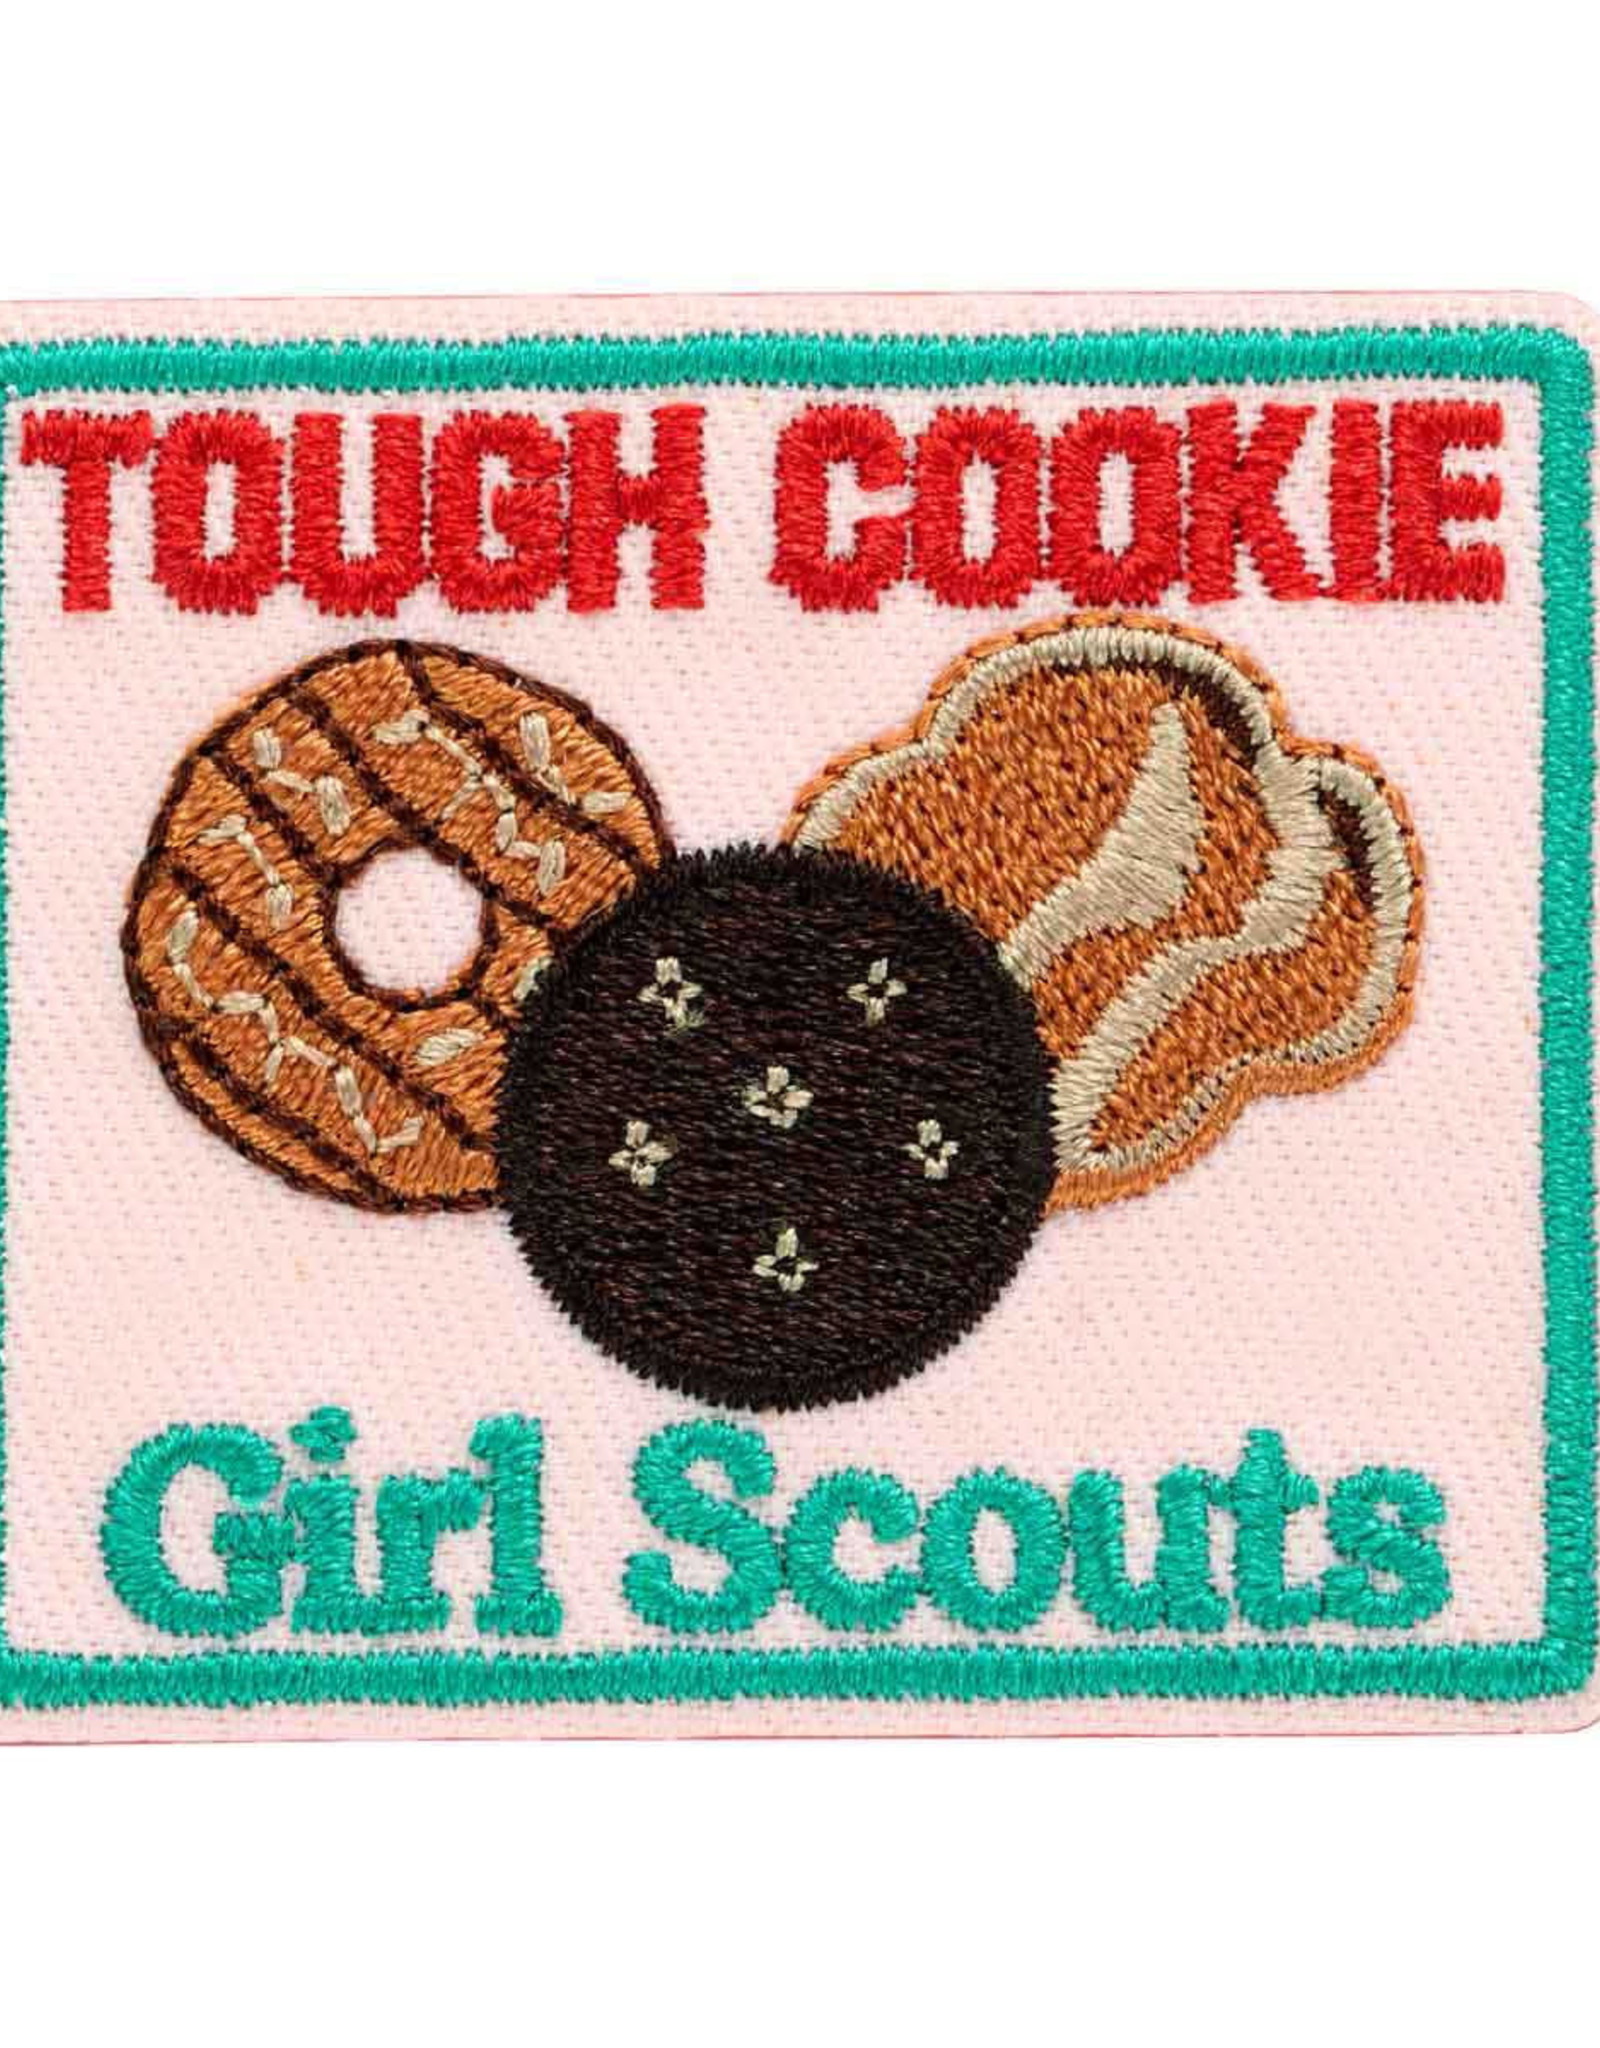 GIRL SCOUTS OF THE USA Tough Cookie Iron-On Fun Patch